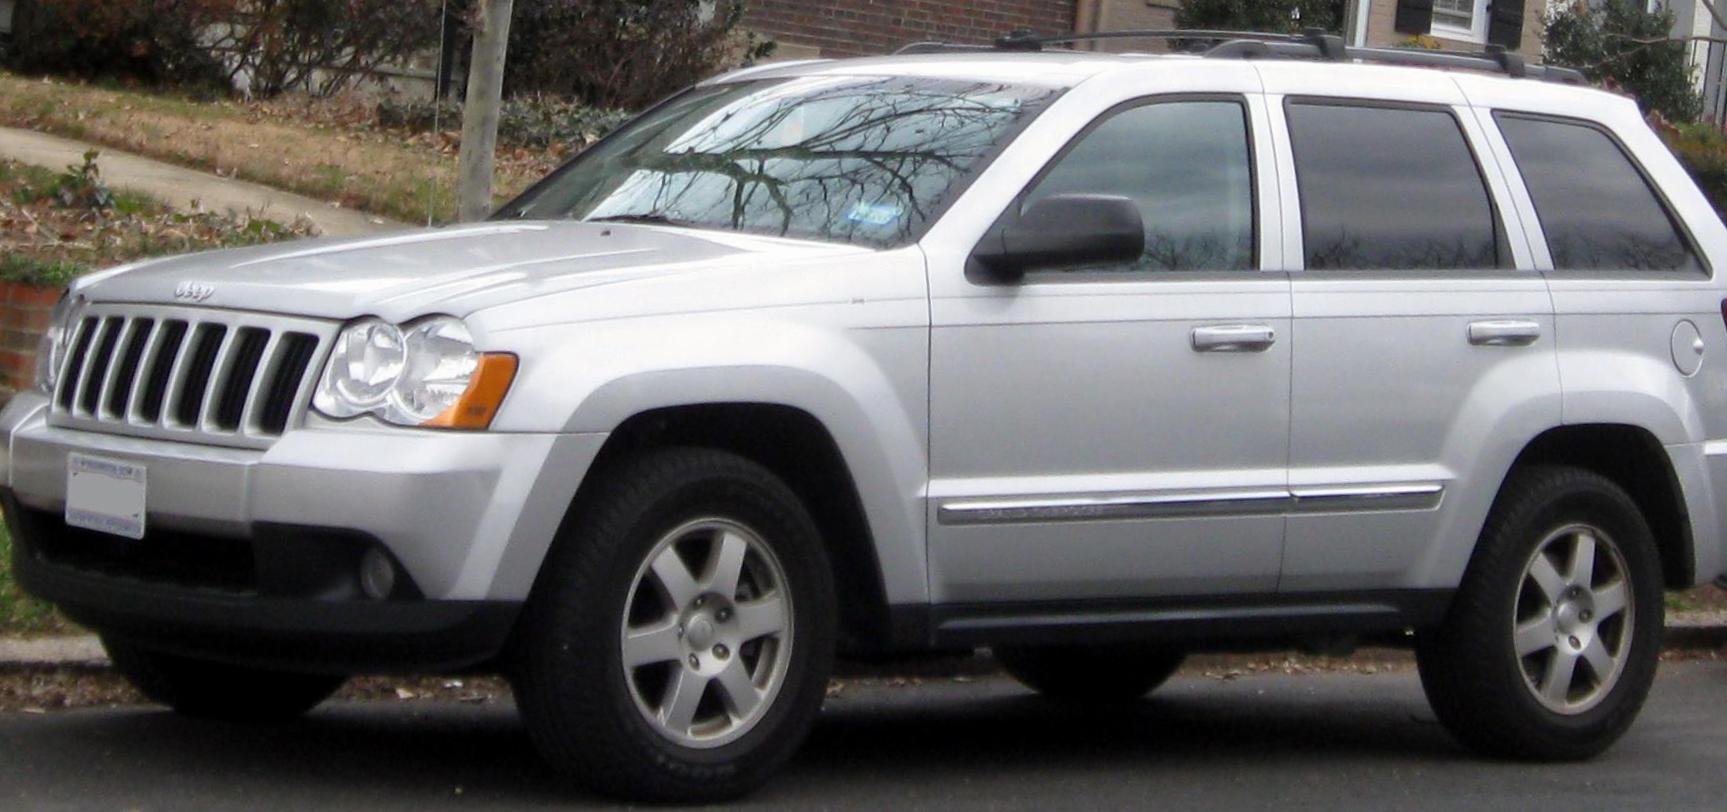 Jeep Cherokee Specification 2008